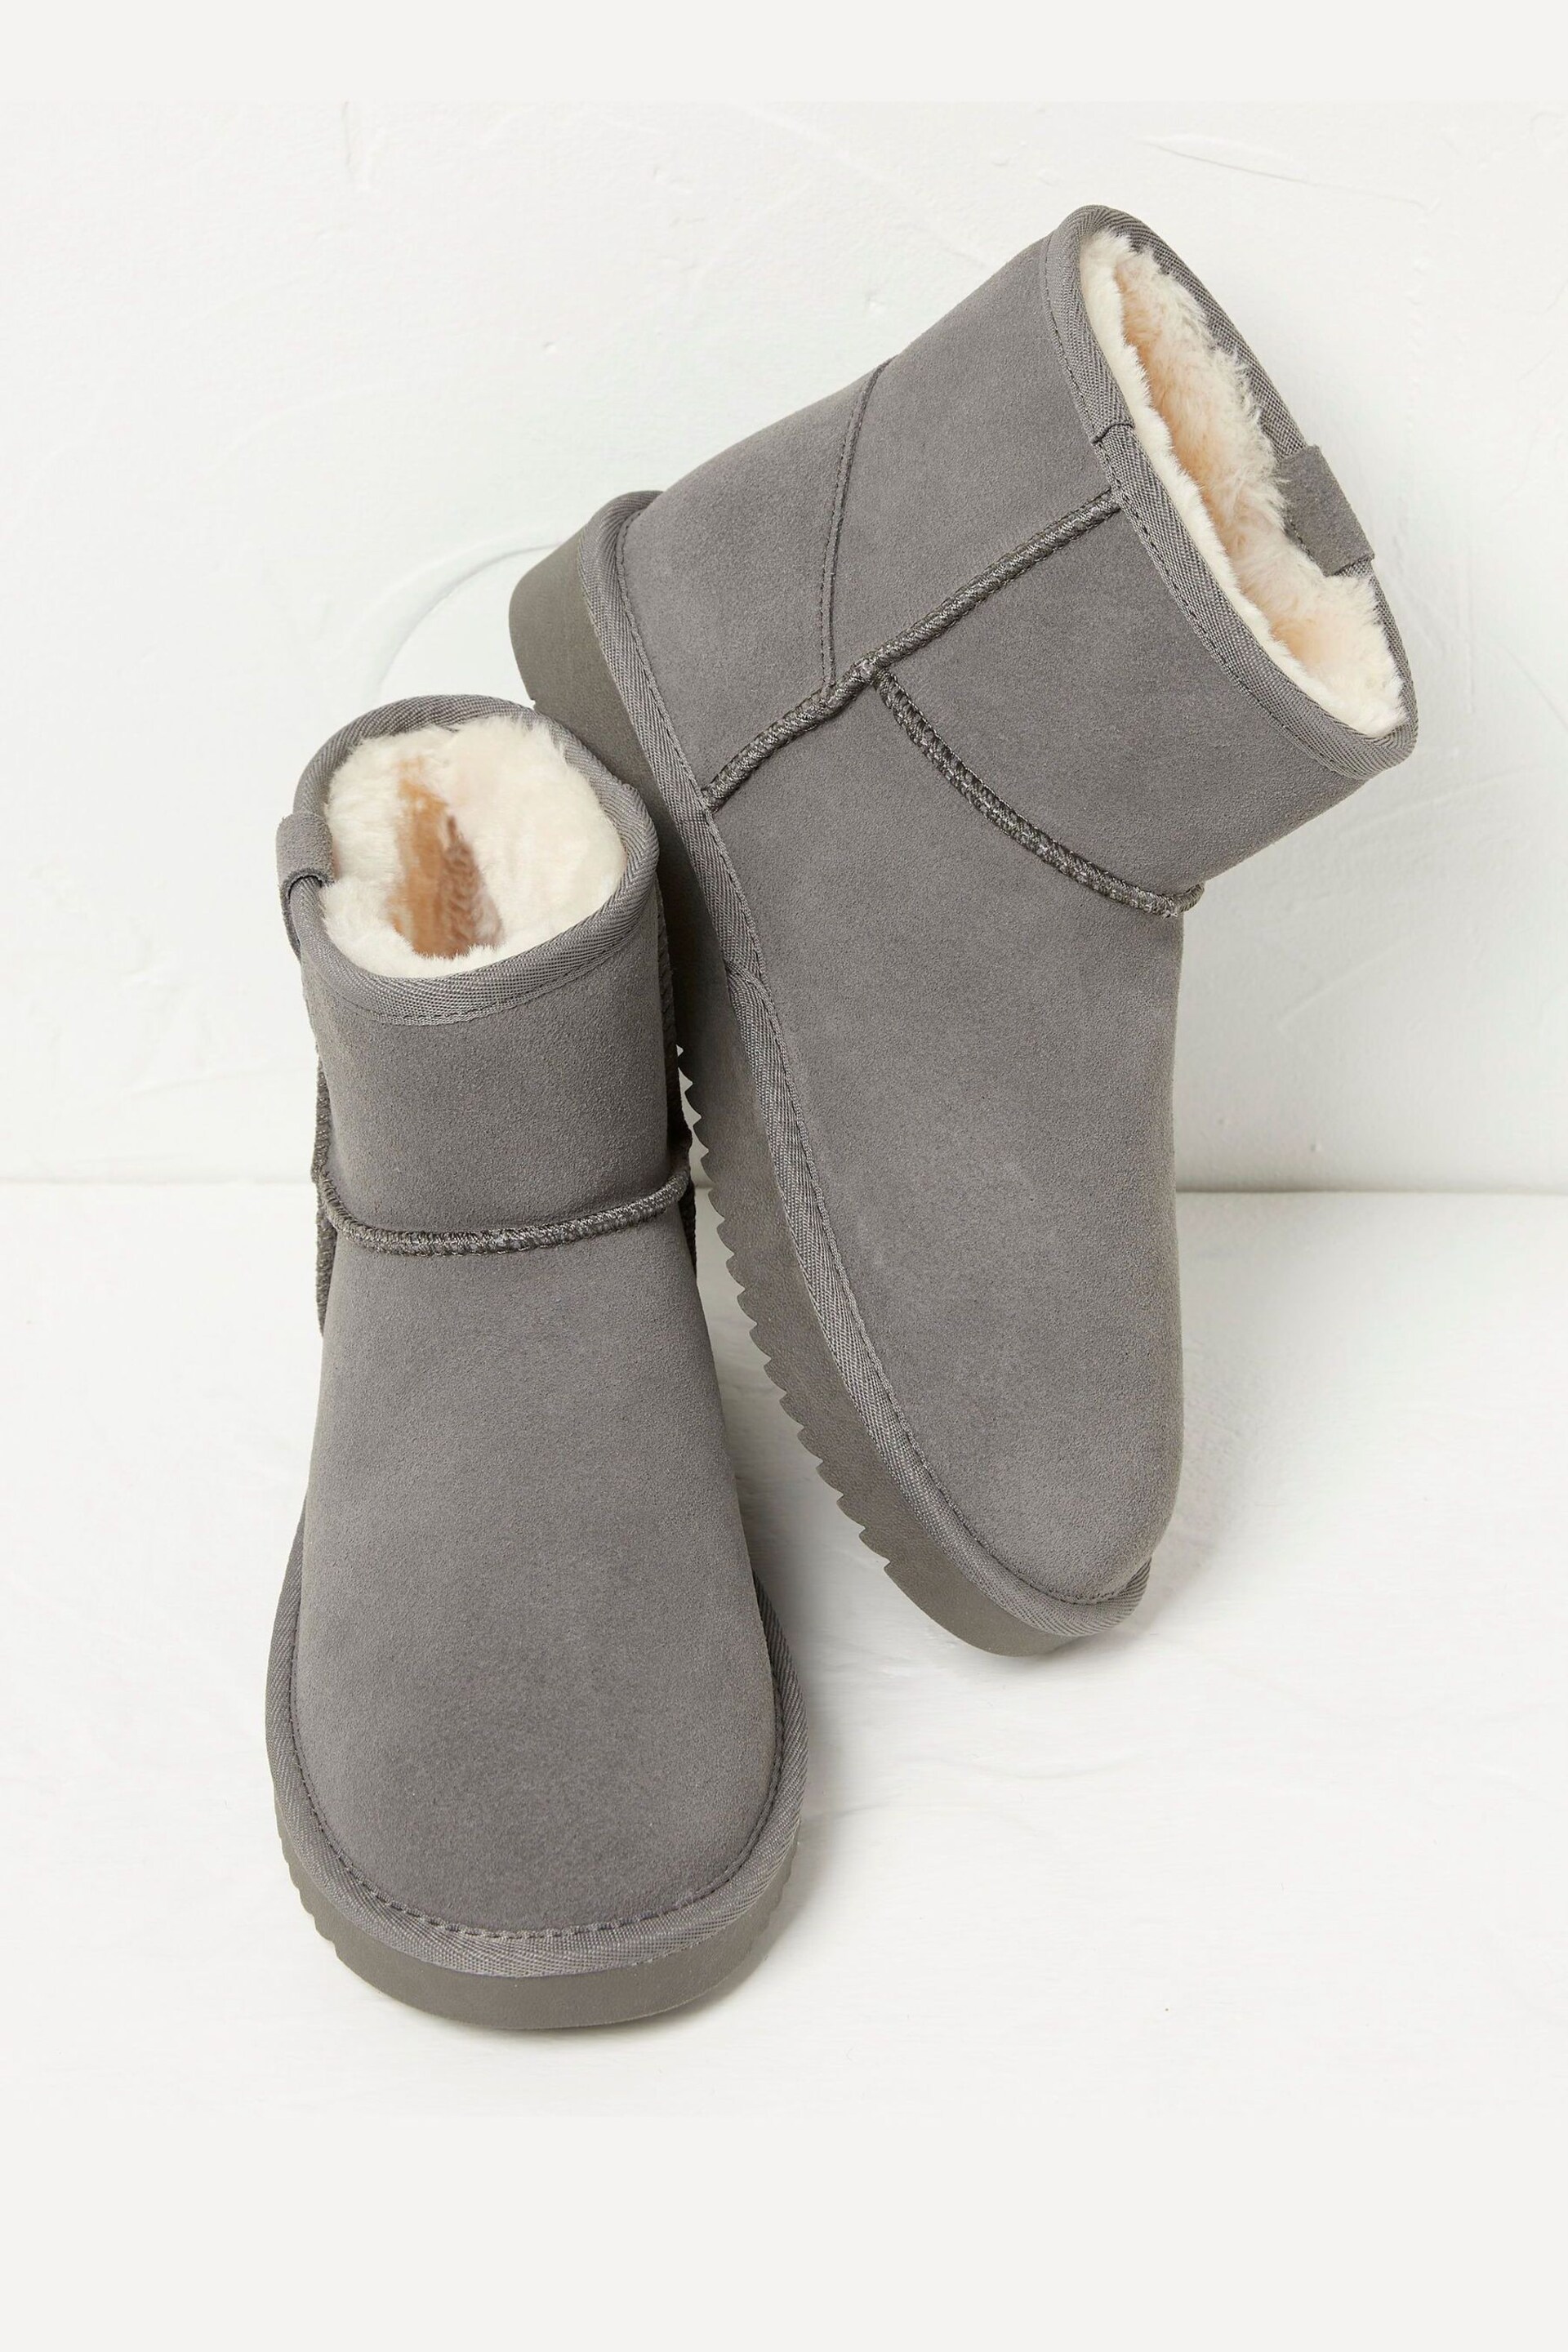 FatFace Grey Suede Slipper Boots - Image 2 of 4